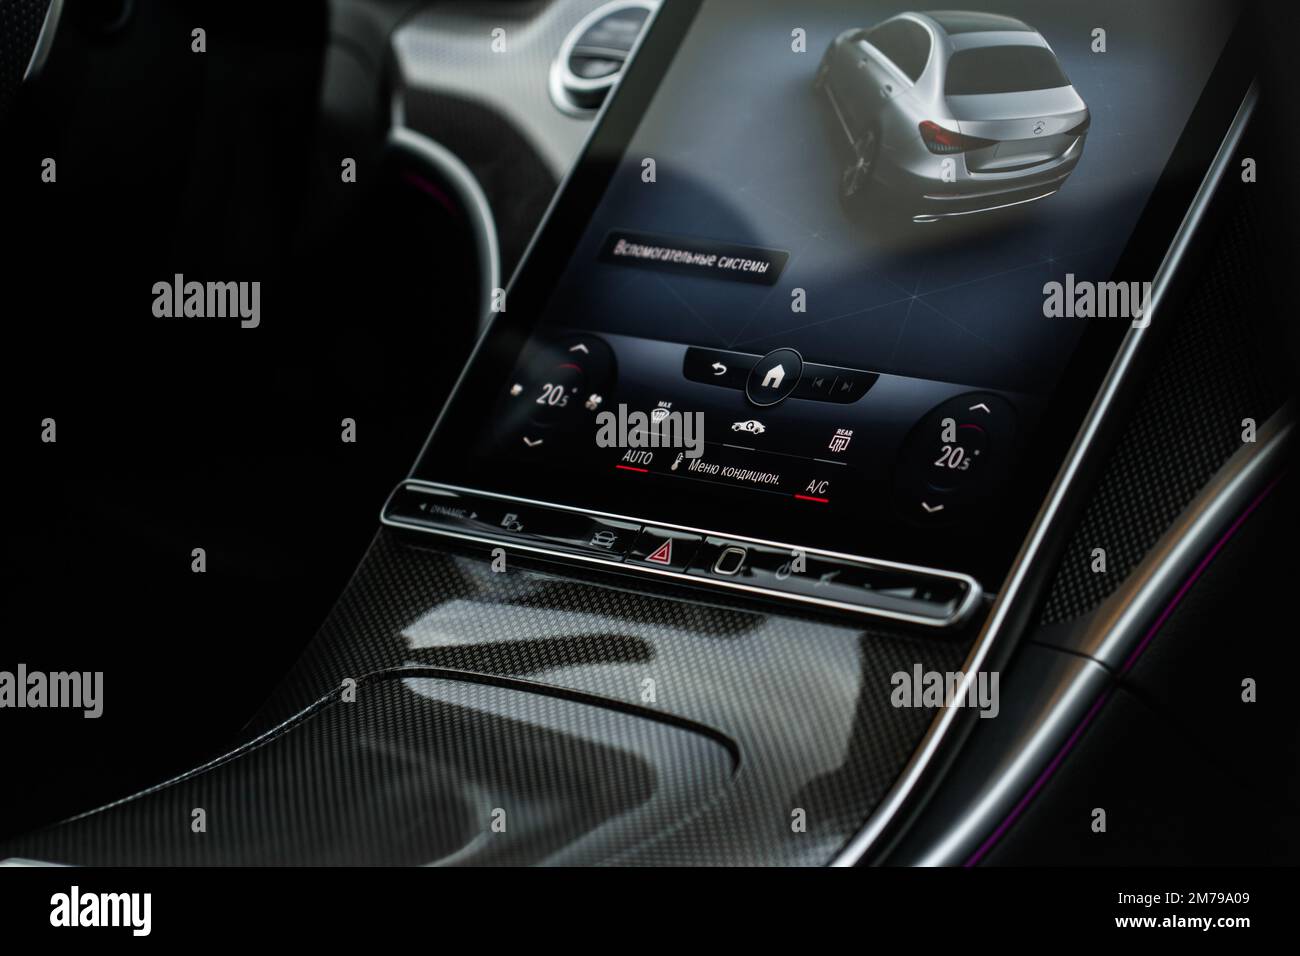 MOSCOW, RUSSIA - FEBRUARY 02, 2022. Mercedes-Benz C-Class 200 (W206), interior view. Interior close up view. Touchscreen monitor on the dashboard of t Stock Photo